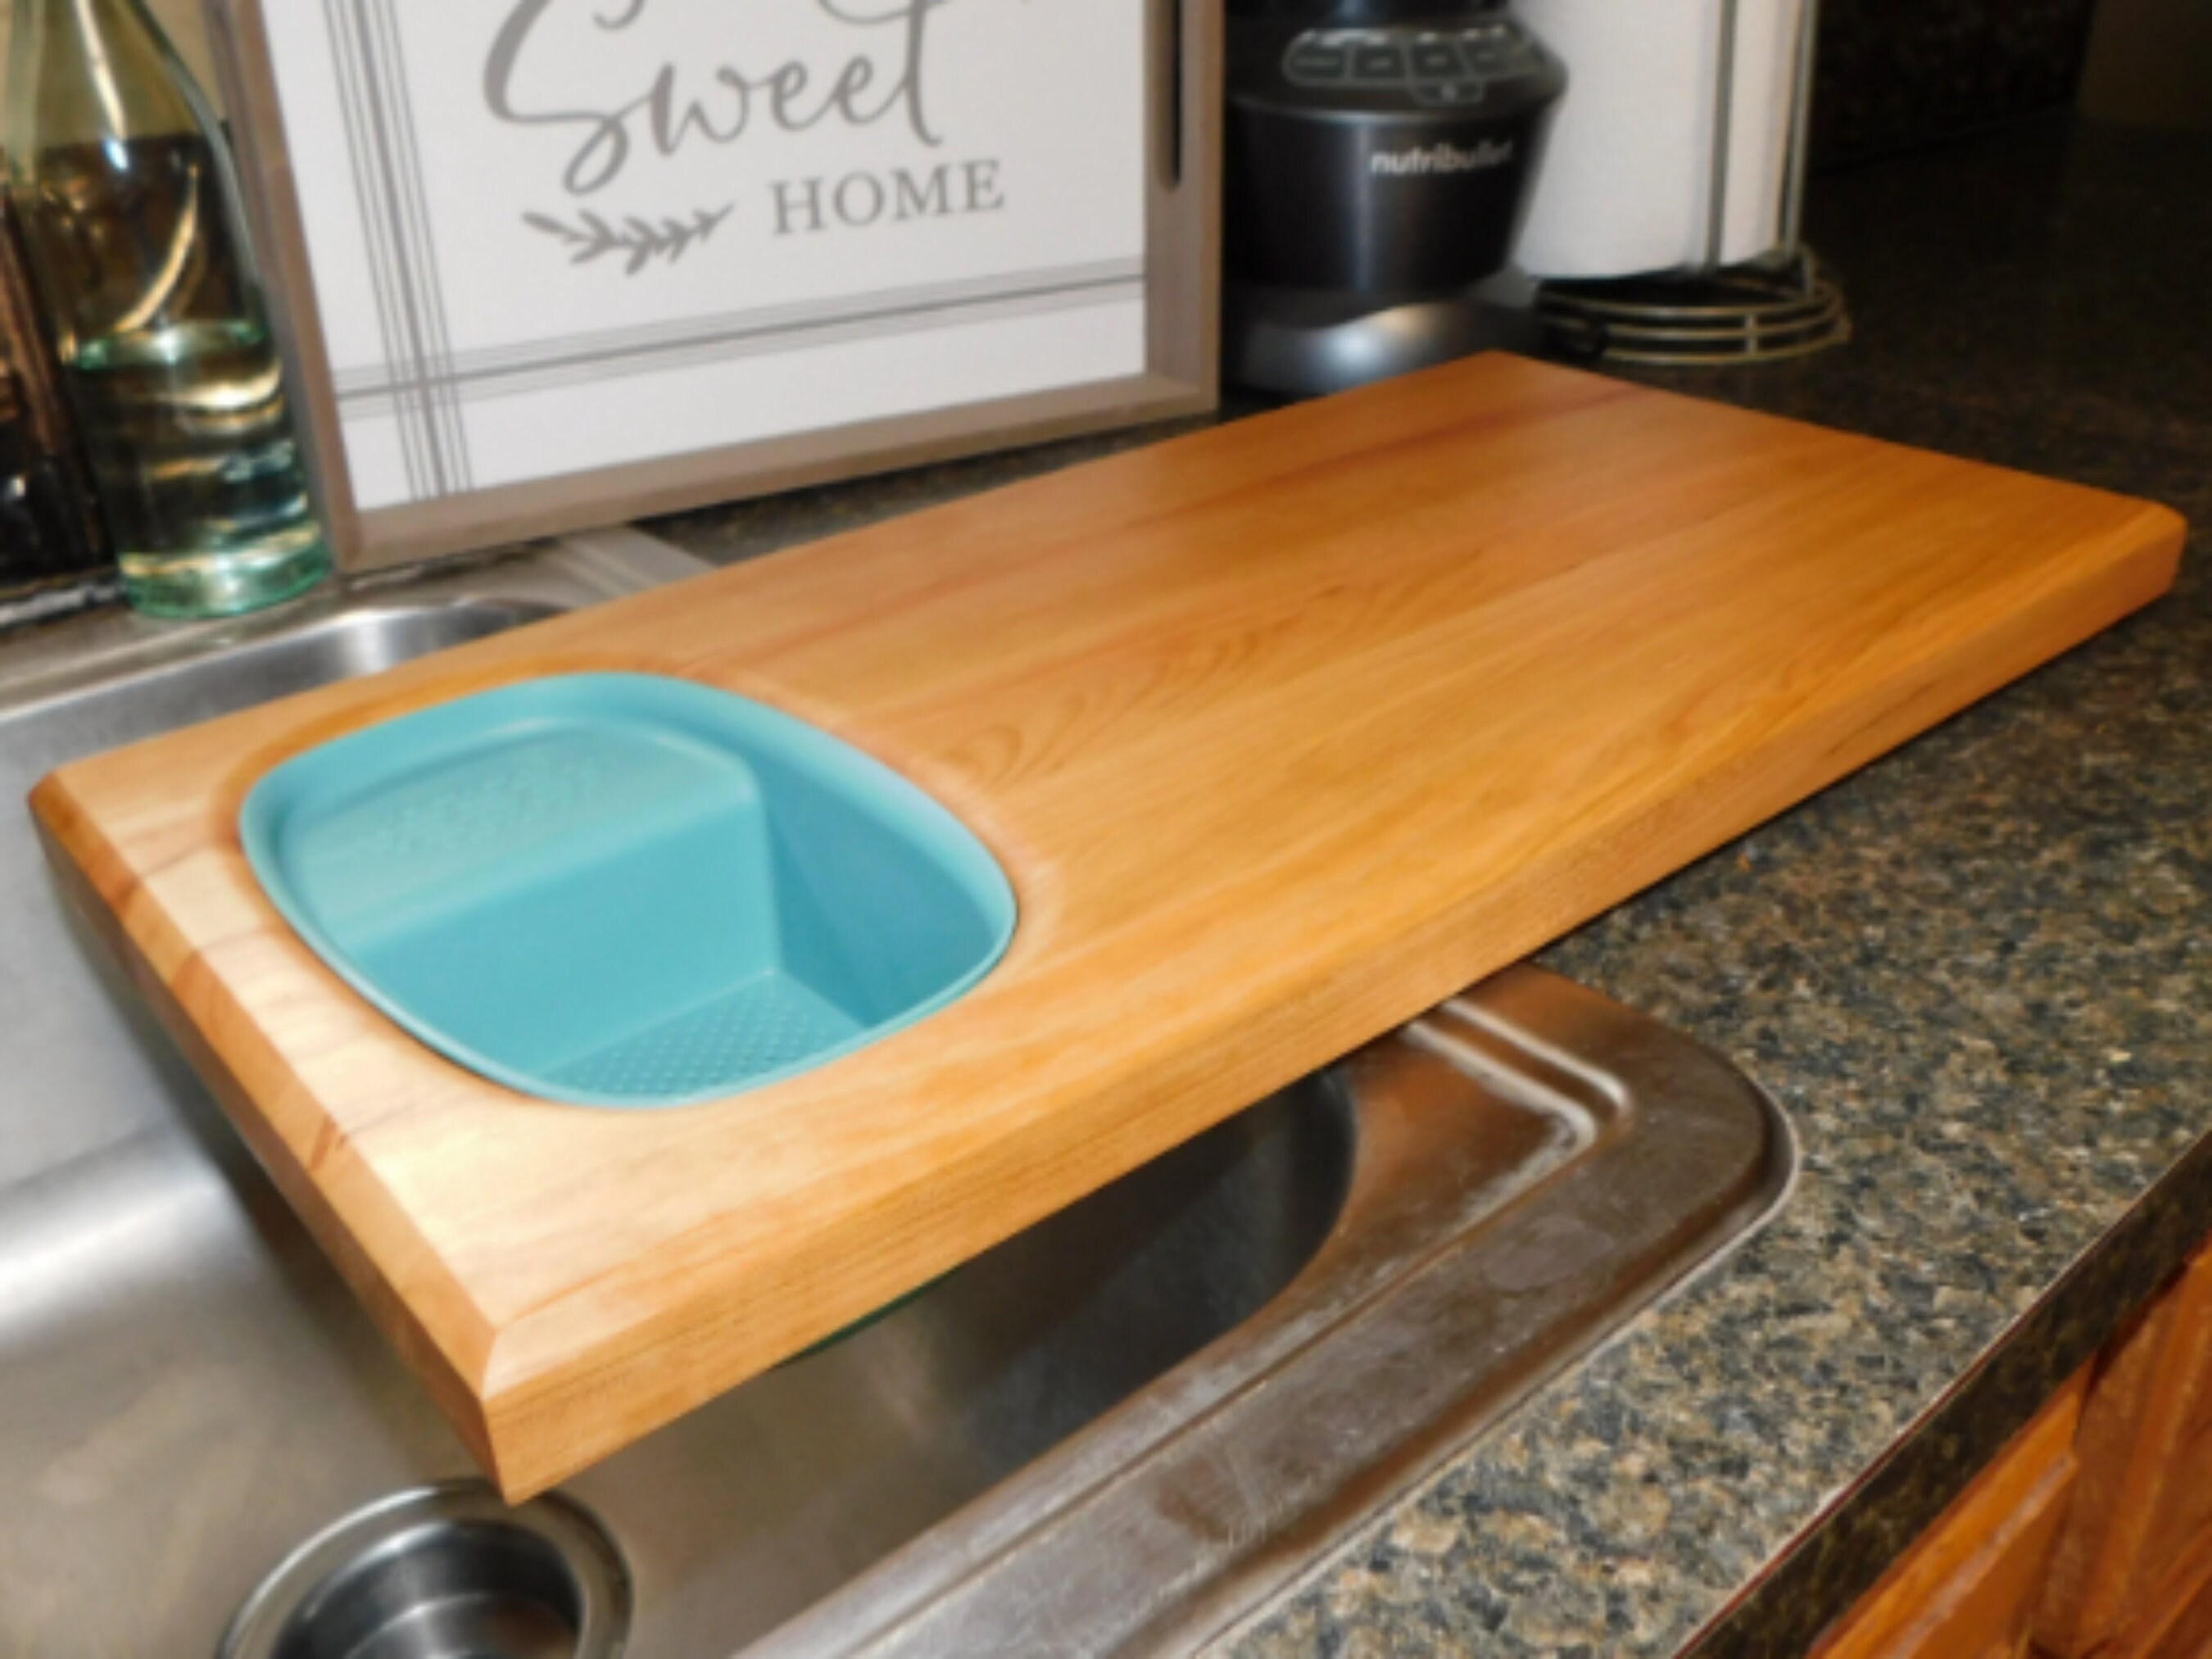 Over-the-sink Cutting Board, Kitchen Sink Strainer, Large Custom Wood  Cutting Board, Sink Cover, Couples Gift, Christmas Gift, Chop Board 